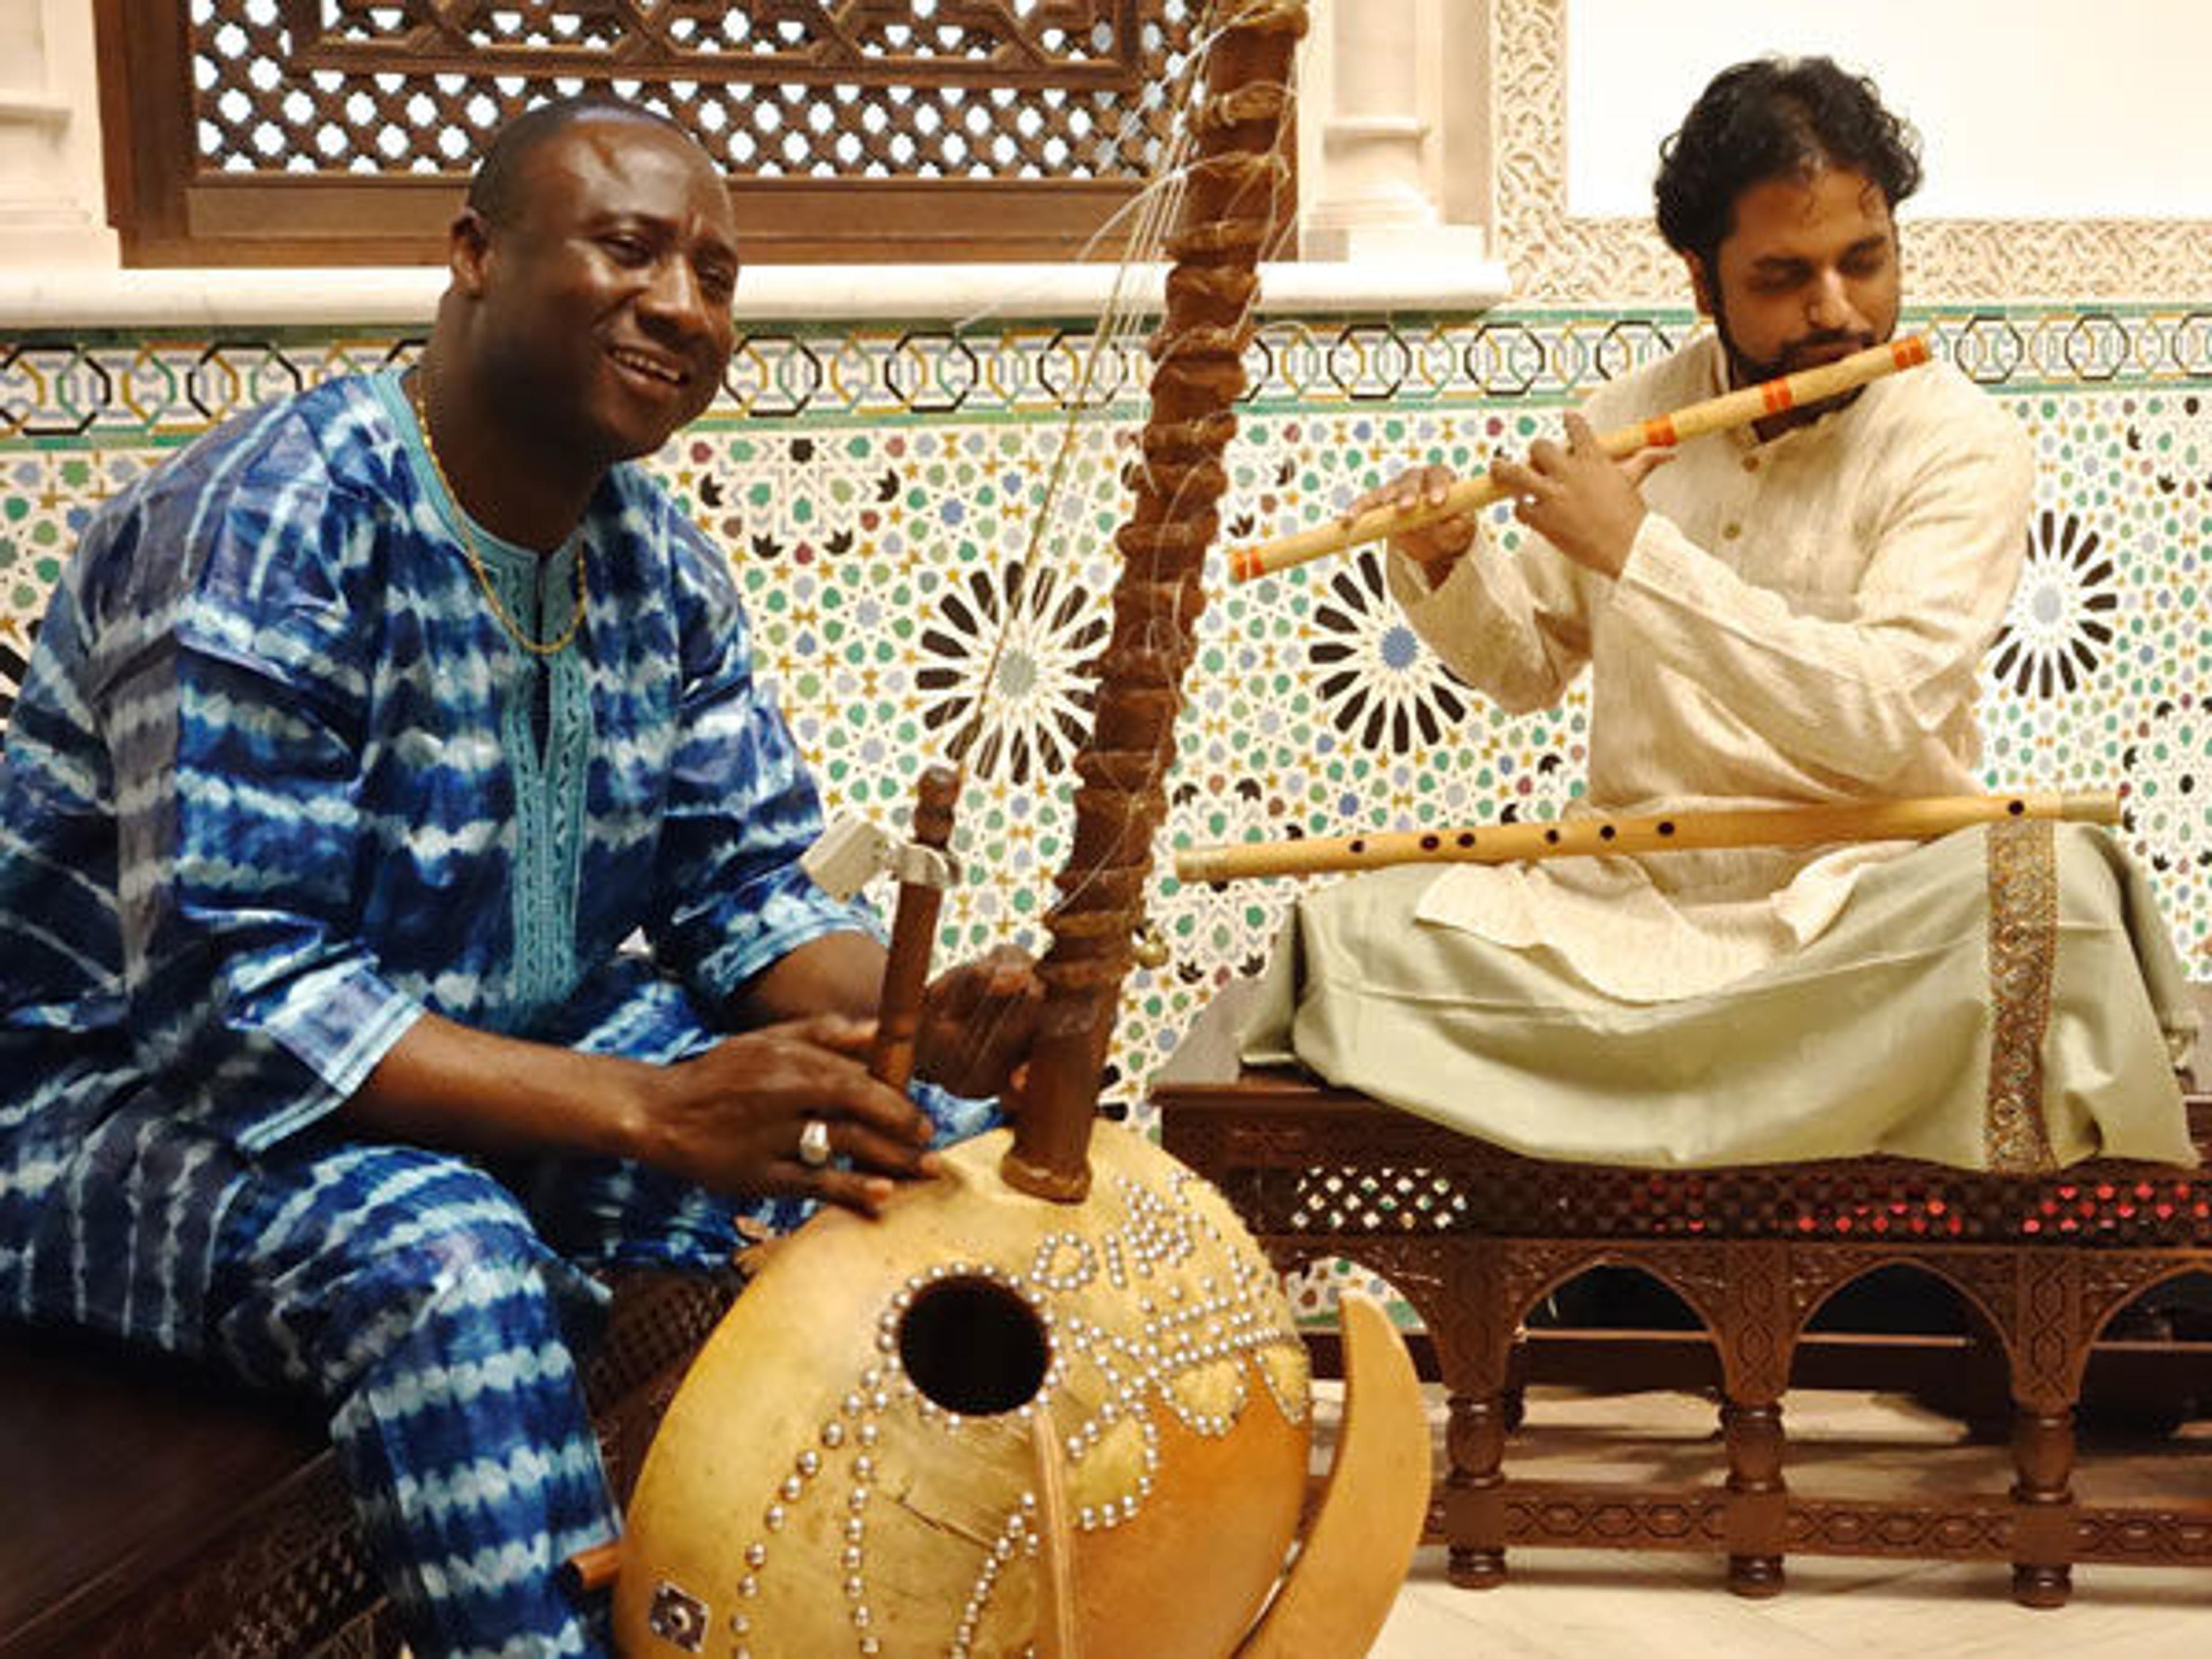 Yacouba Sissoko (left) and Jay Gandhi (right) perform in the Moroccan Court. Photo courtesy of Catherine Katona